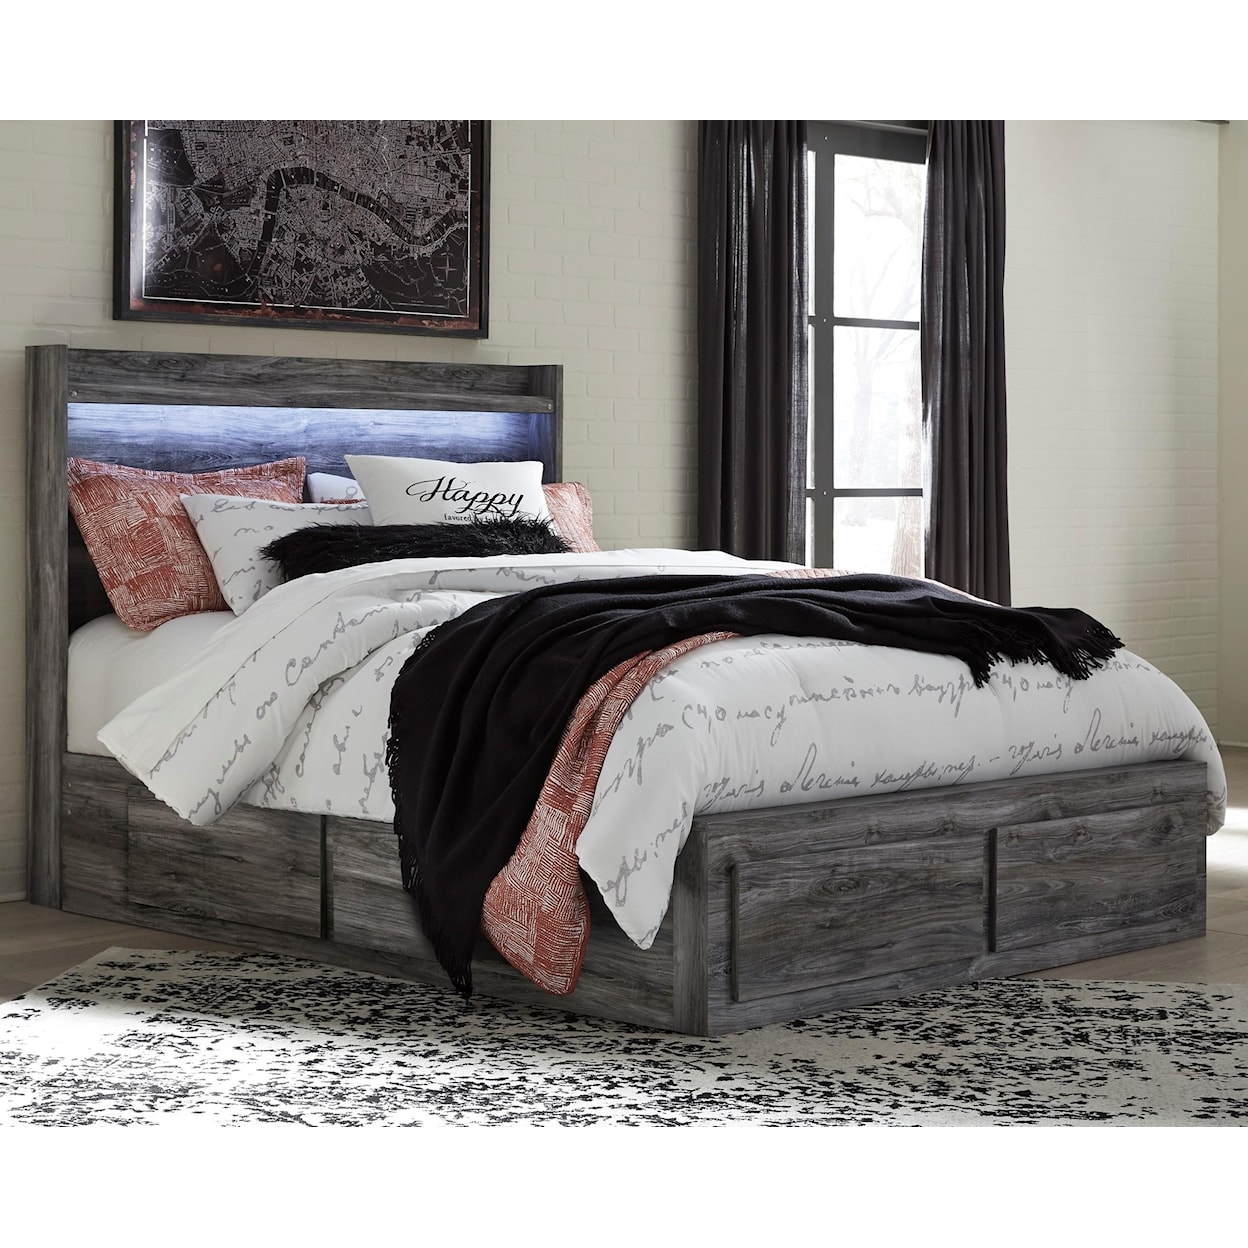 Ashley Signature Design Baystorm Queen Storage Bed with 6 Drawers